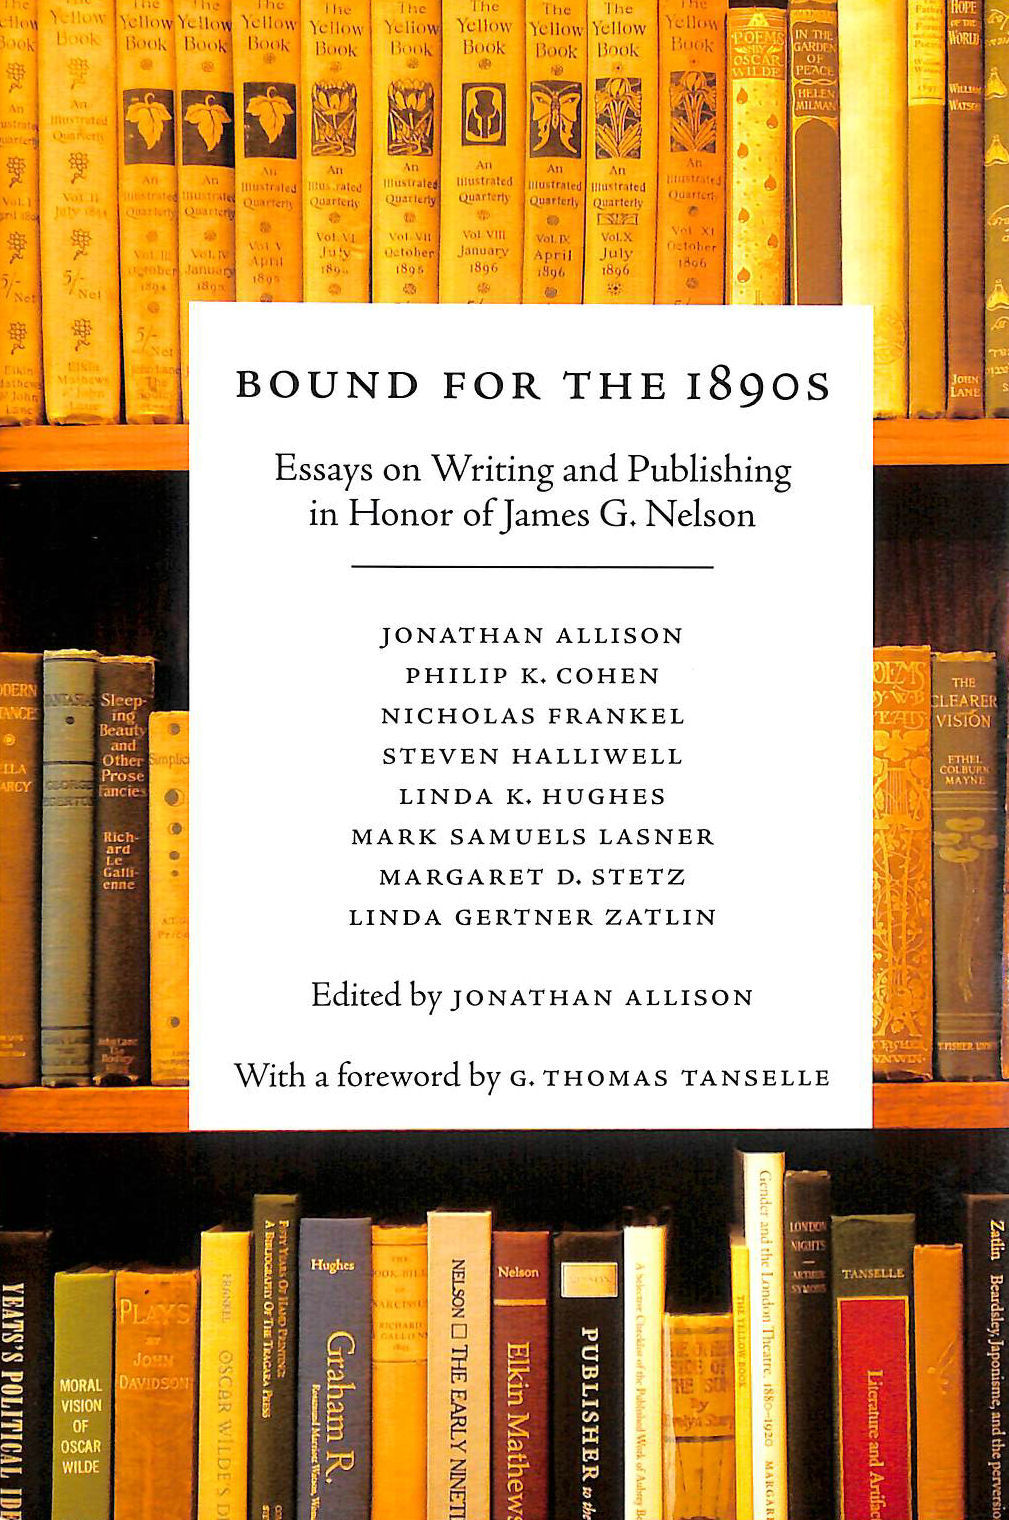 JONATHAN ALLISON - Bound for the 1890s: Essays on Writing and Publishing in Honor of James G. Nelson